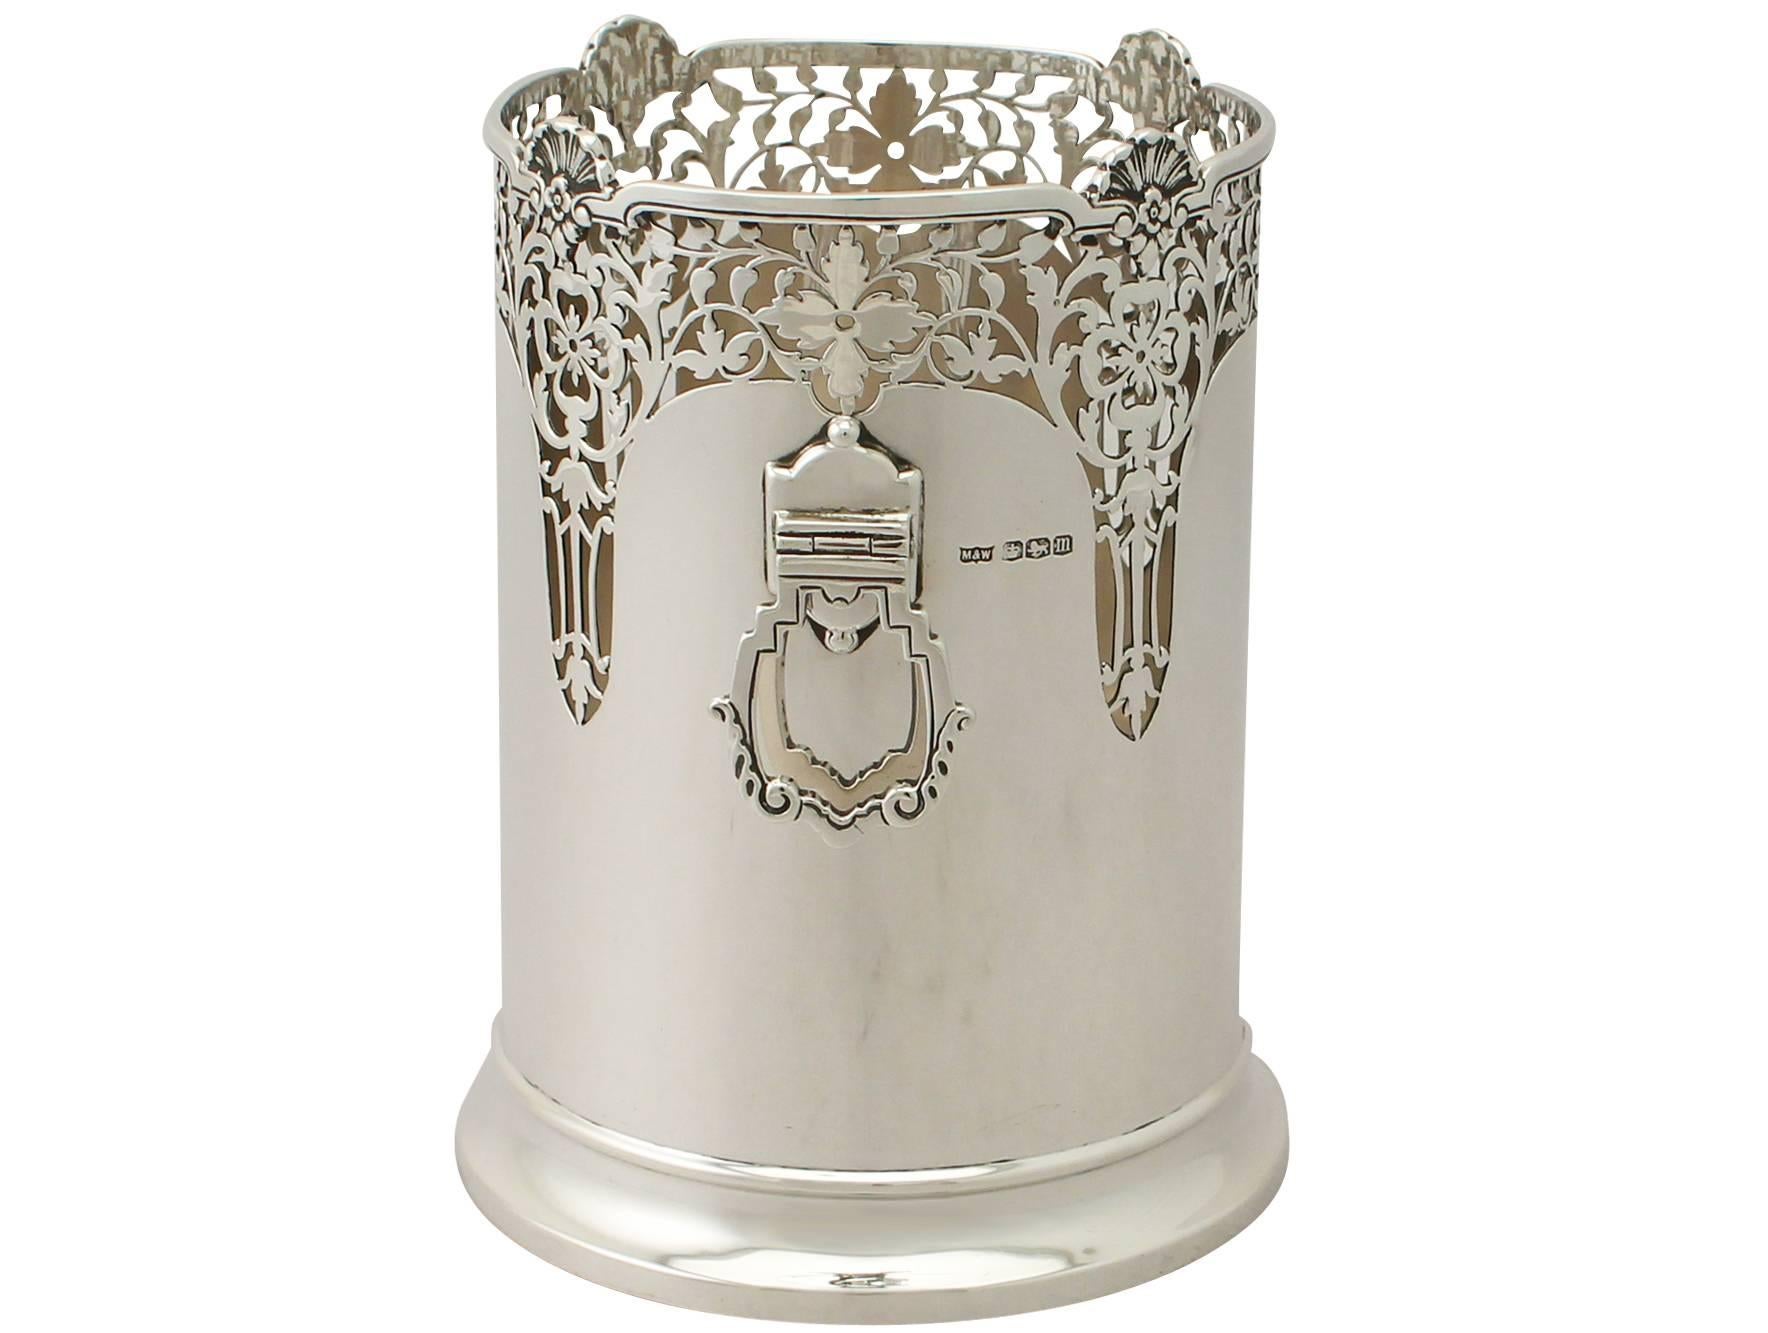 An exceptional, fine and impressive antique George V English sterling silver bottle coaster in the Art Deco style; an addition to our ornamental silverware collection.

This exceptional antique George V sterling silver bottle coaster has a plain